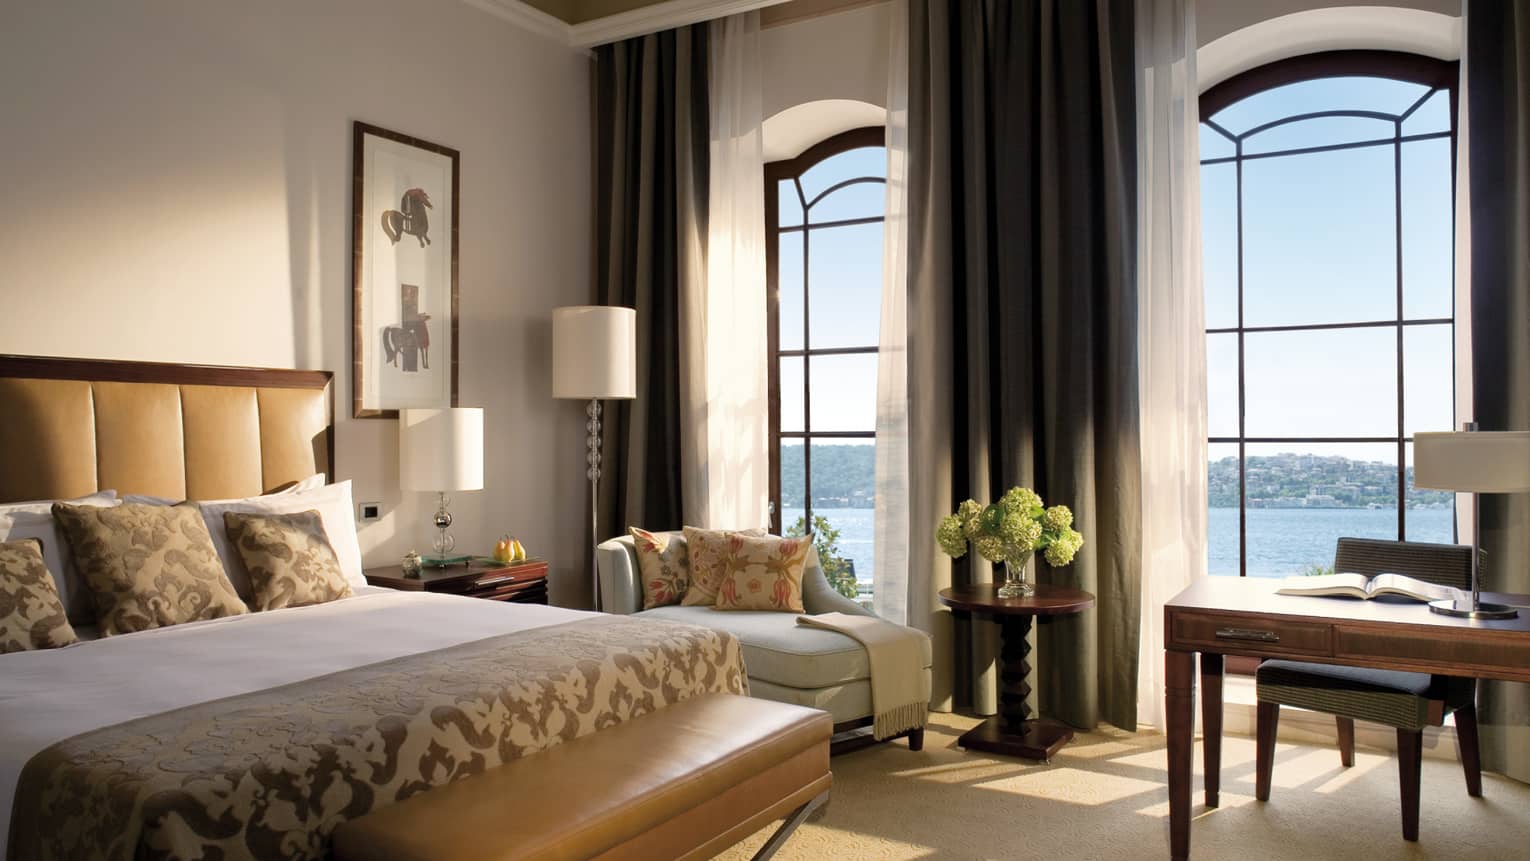 The Palace Bosphorus Room bed with padded brown headboard, bench, sunny bay windows with sea views